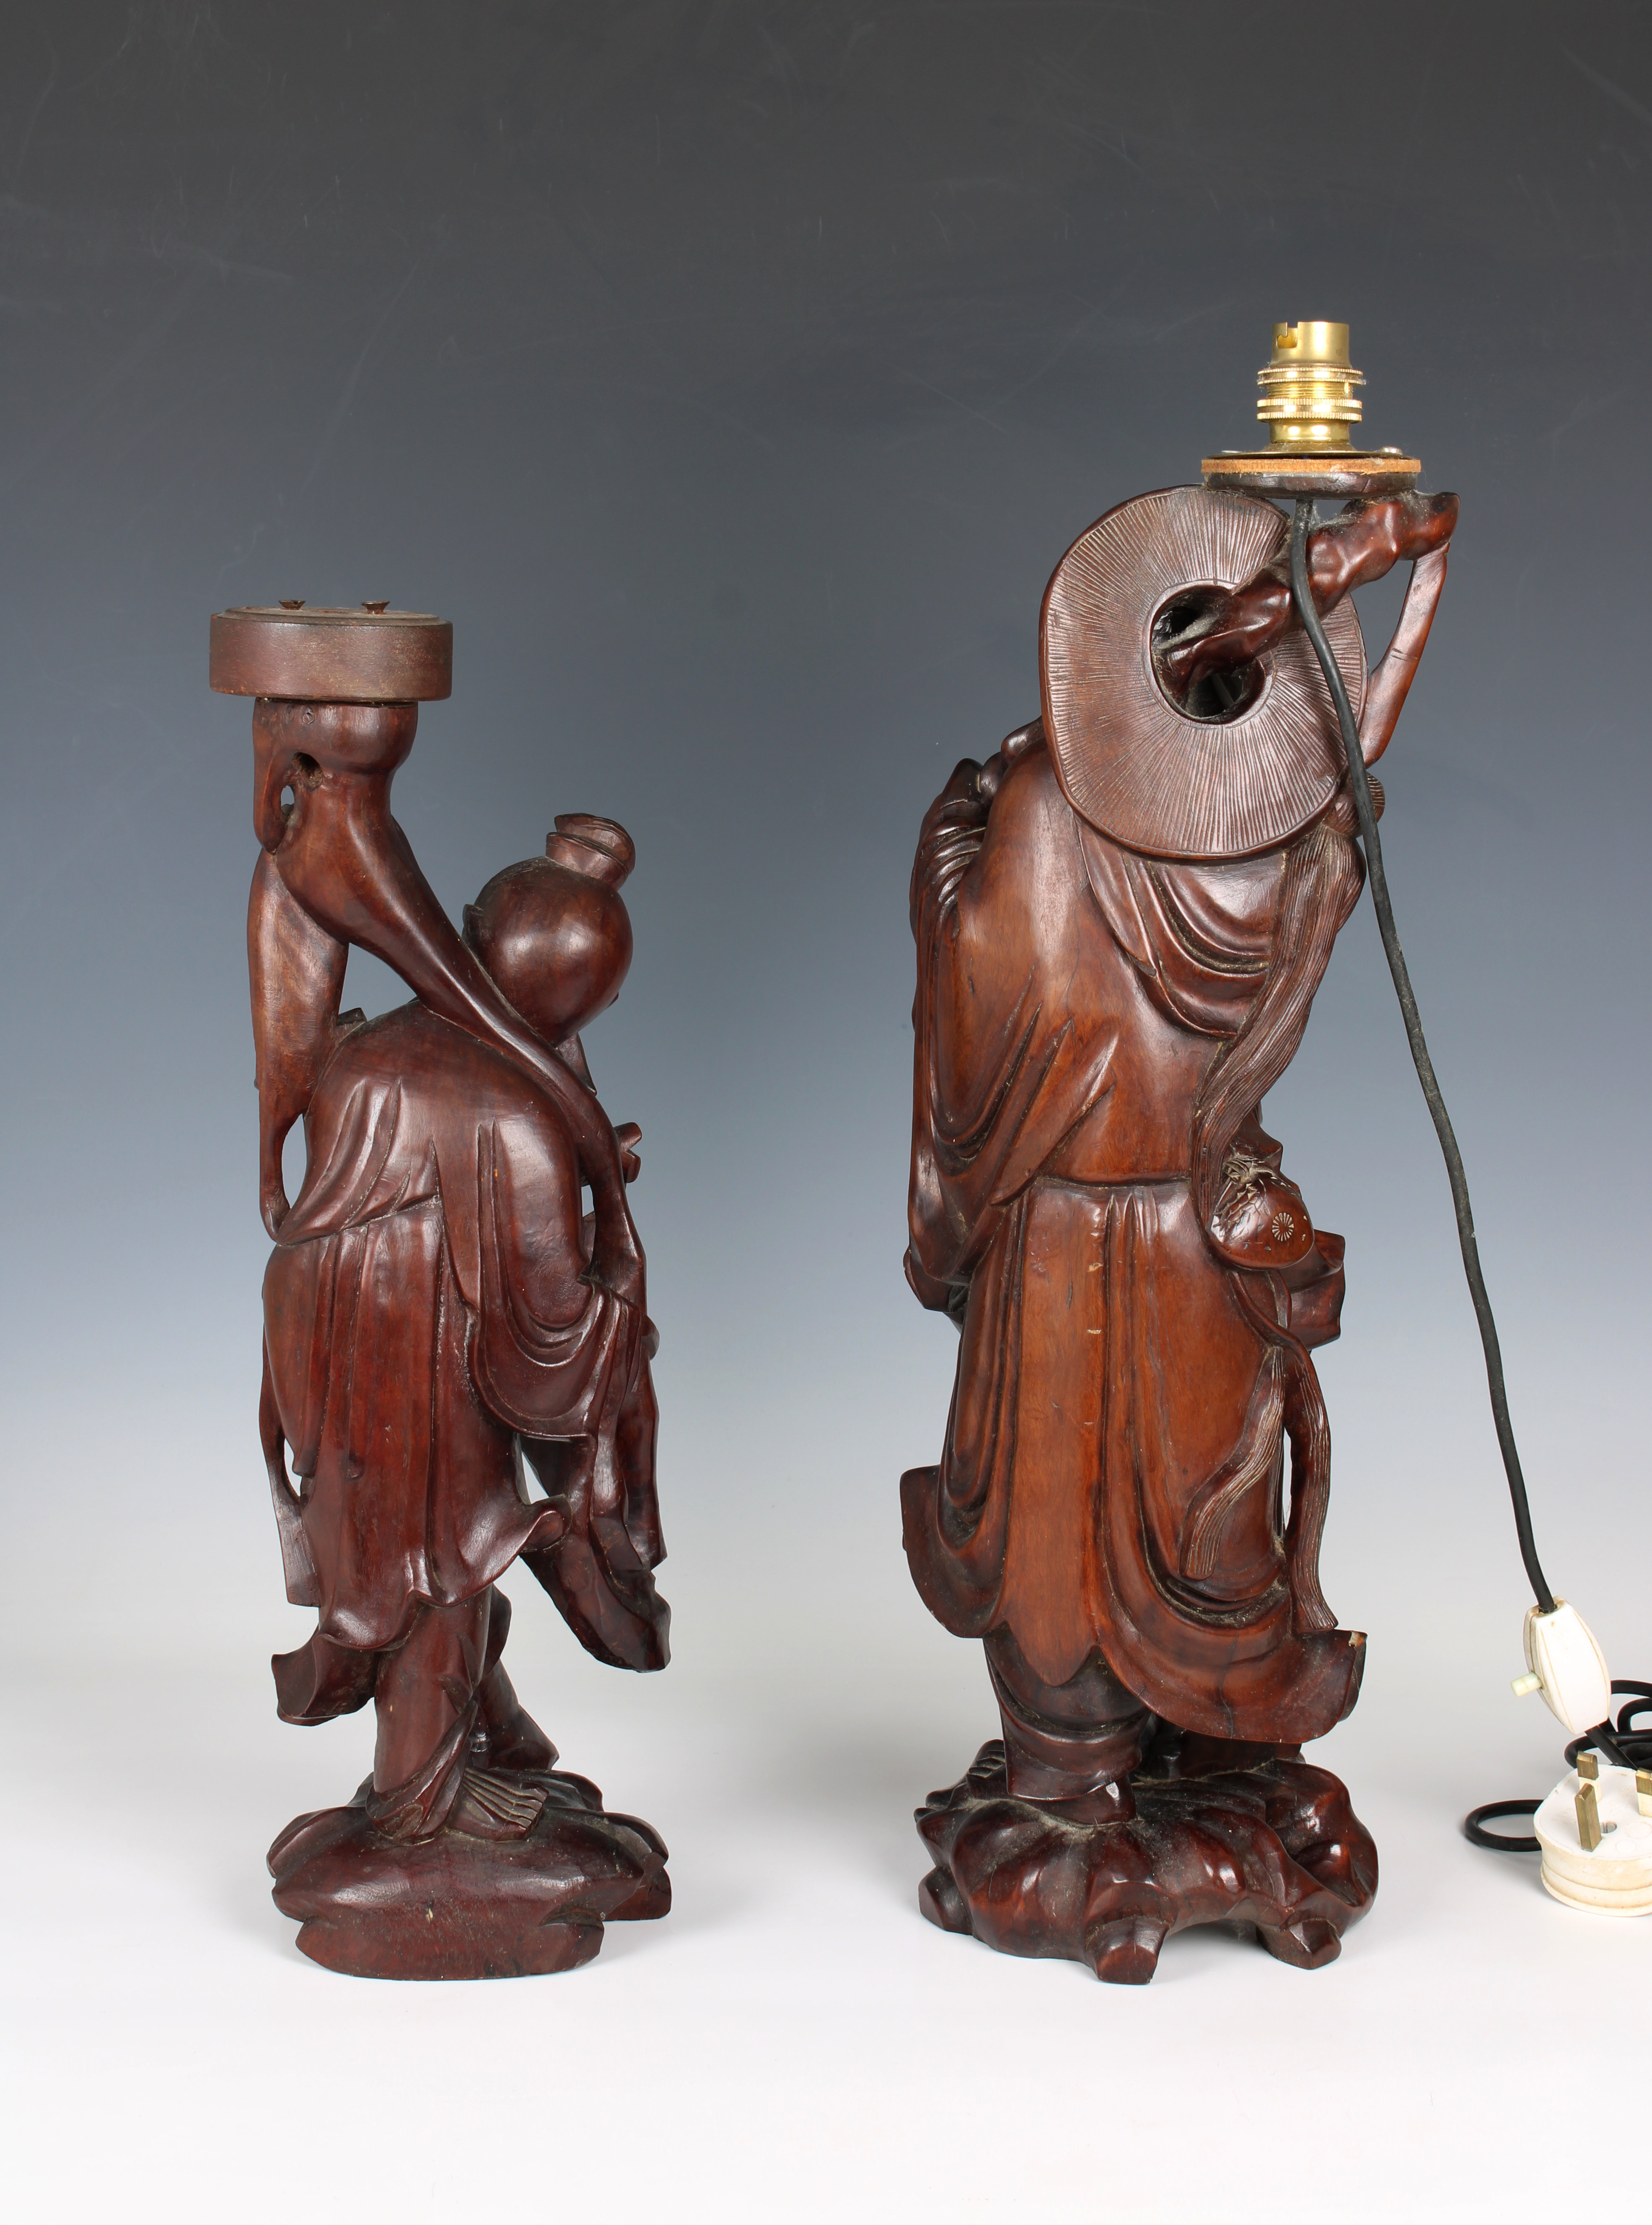 Two early 20th century Japanese carved wooden figures converted to table lamps - Image 2 of 2